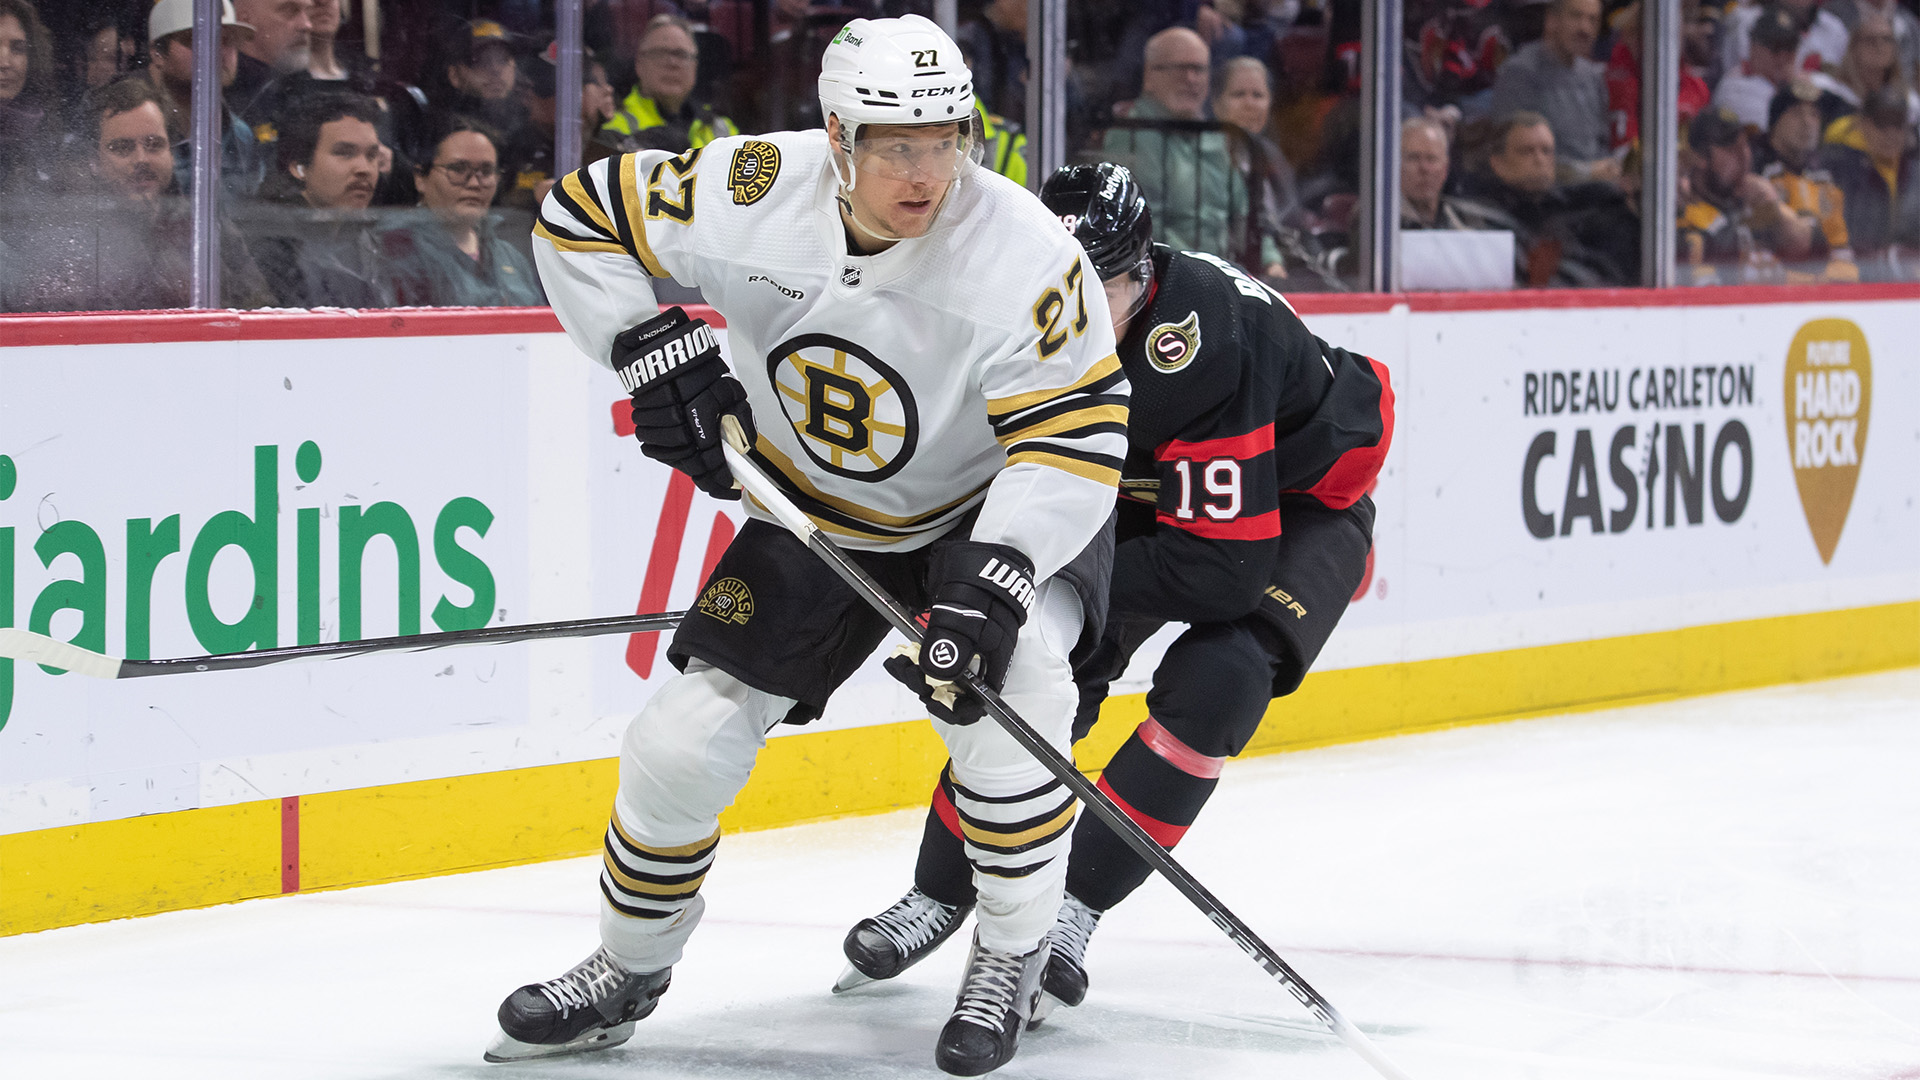 Bruins' Hold Onto Win During Defensive Battle With Senators